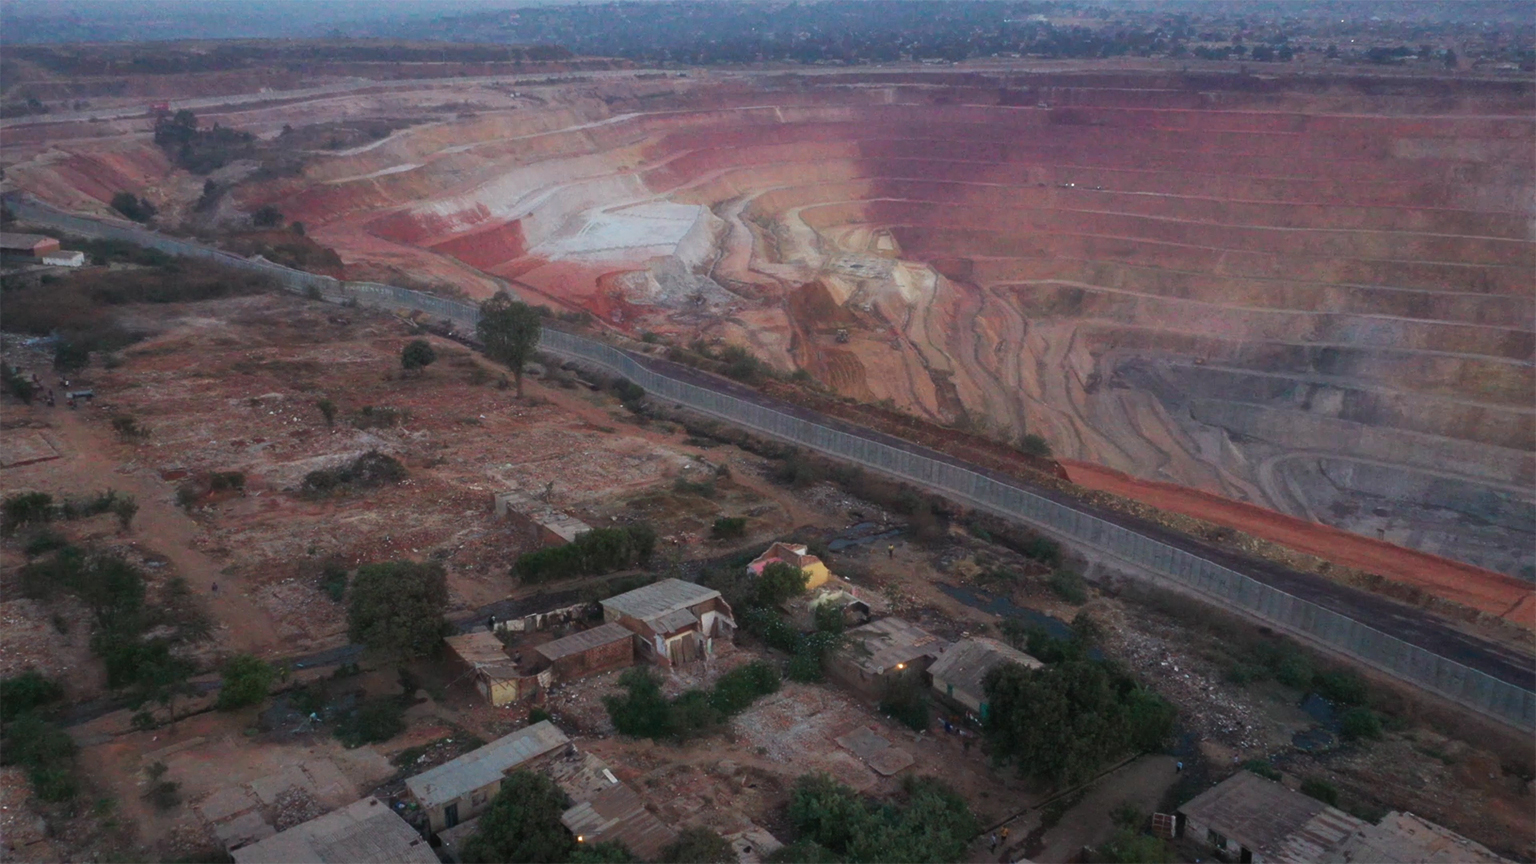 In 2022, 40% of the Gécamines district was taken over by a mining quarry and 209 households left in a controversial relocation process. 